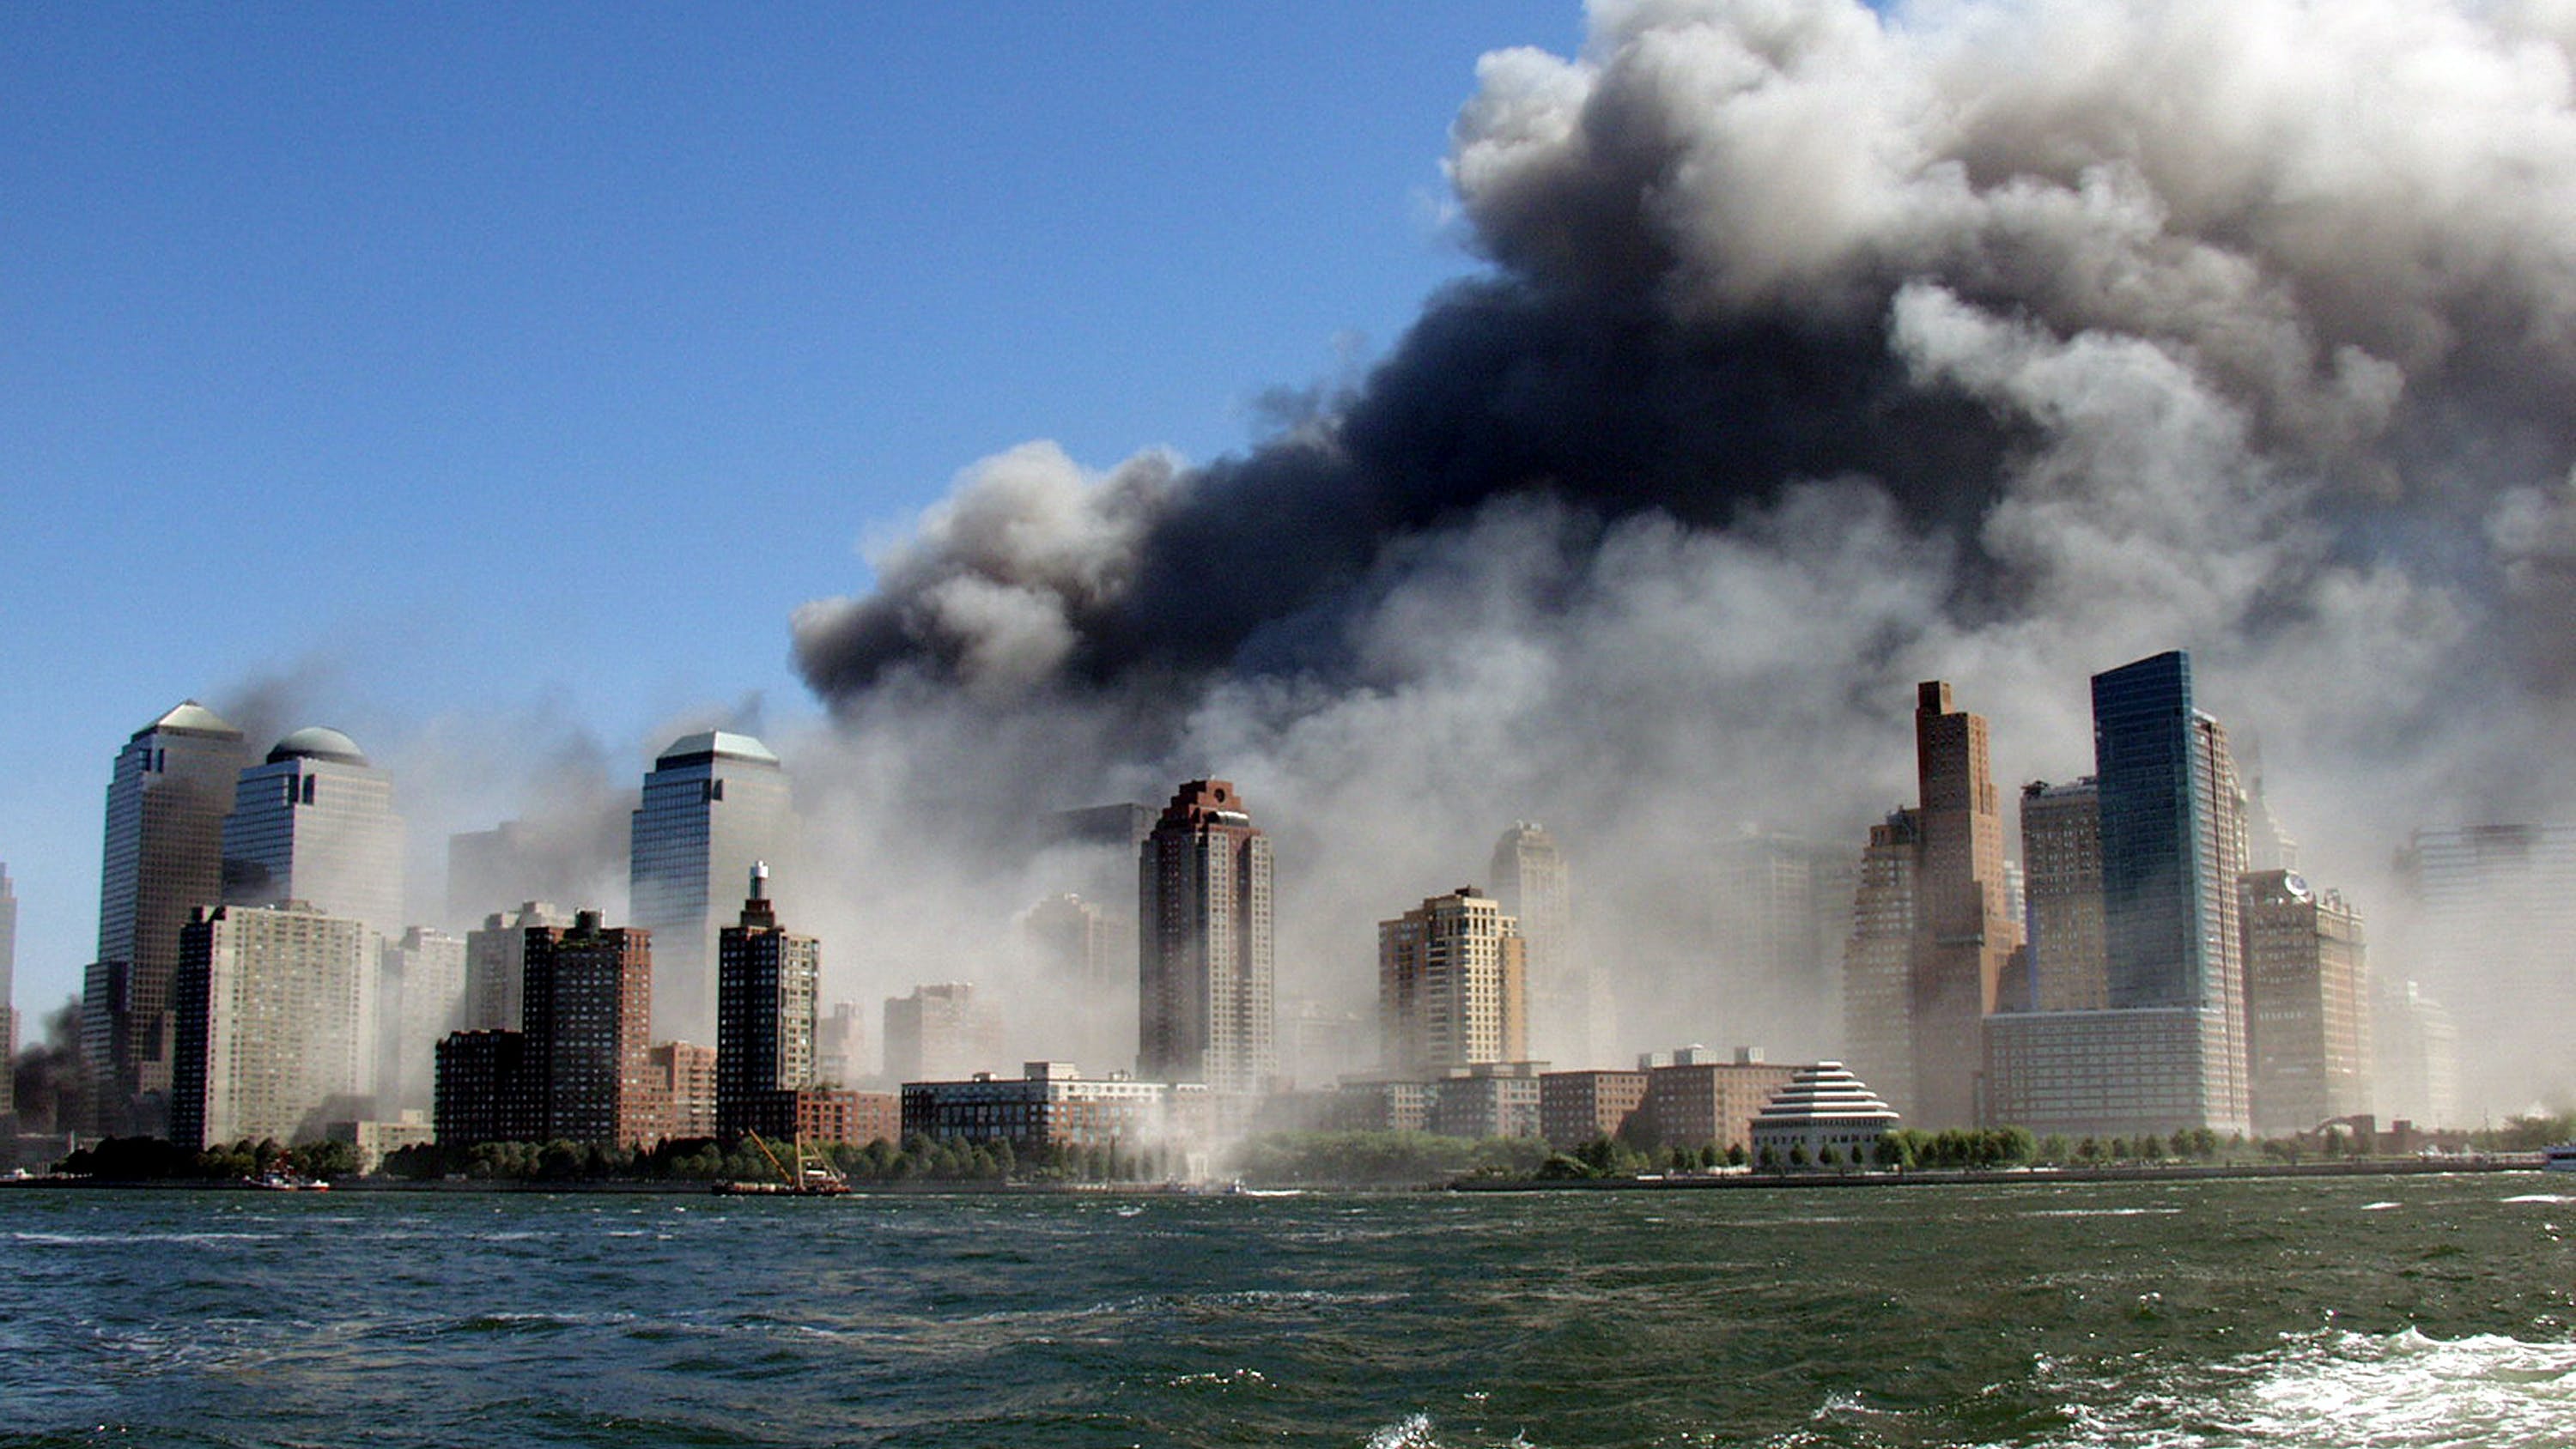 September 11 Attacks: Facts, Background & Impact - HISTORY